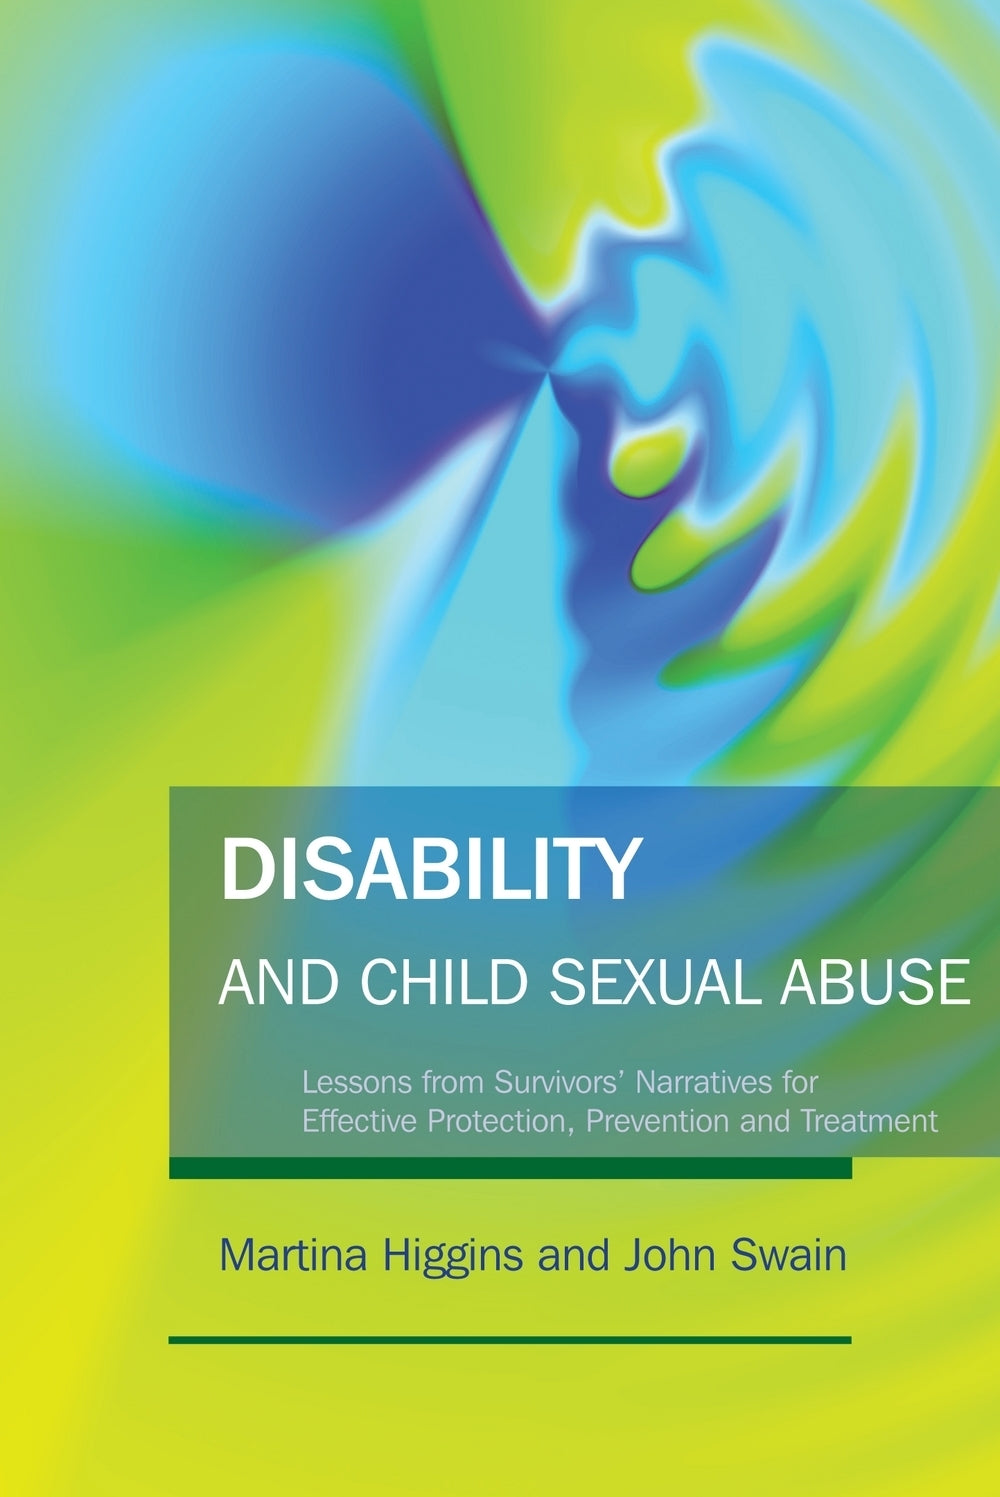 Disability and Child Sexual Abuse by John Swain, Martina Higgins